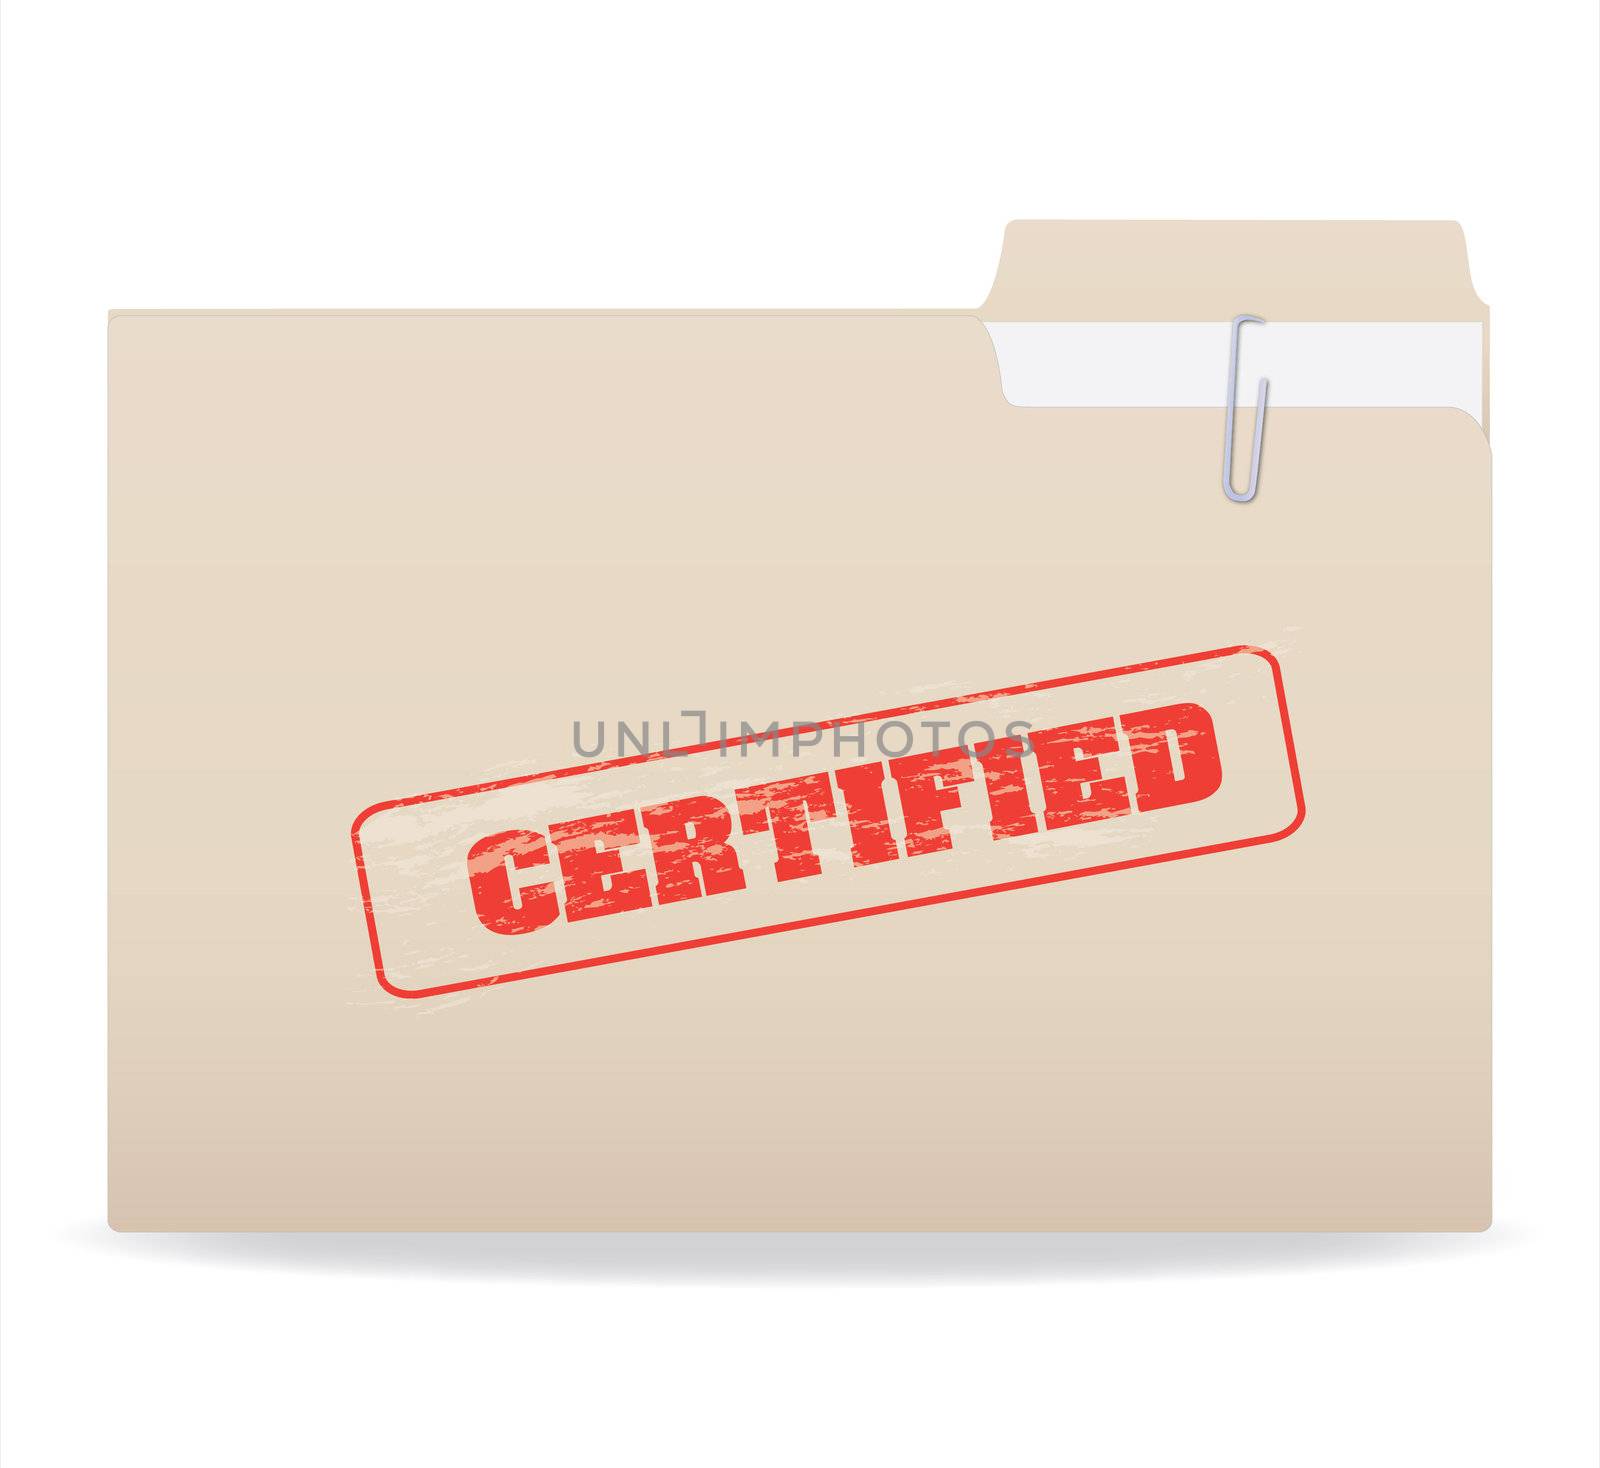 Image of a folder with a confidential stamp isolated on a white background.